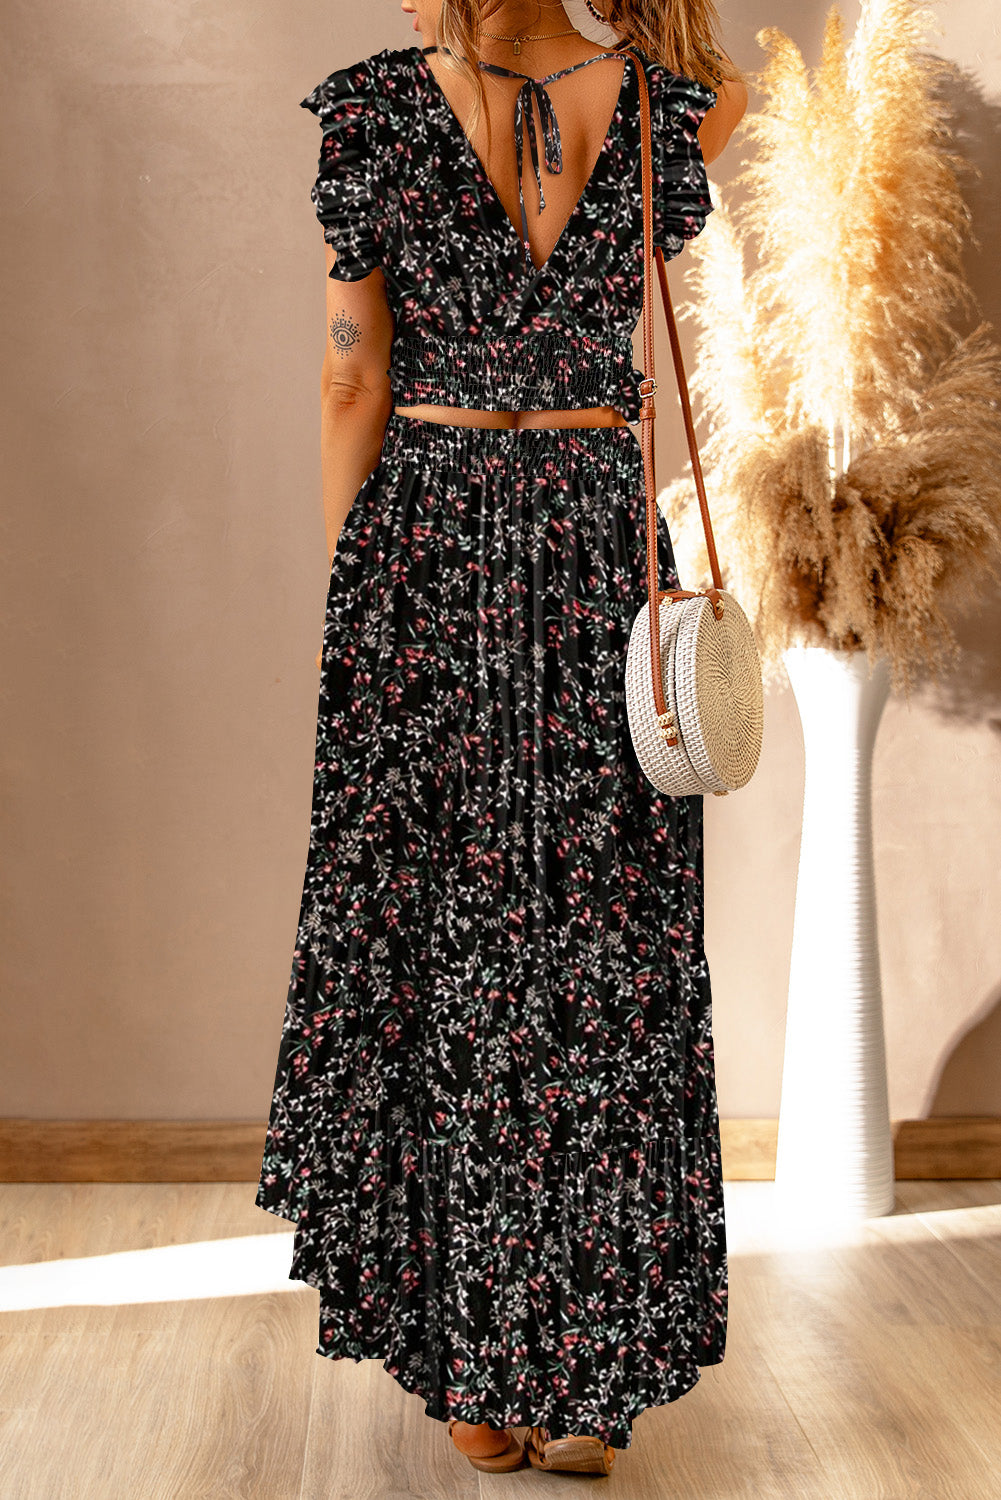 Summer Tight Waist Floral Split Dress Cropped Outfit Slimming Bohemian Dress